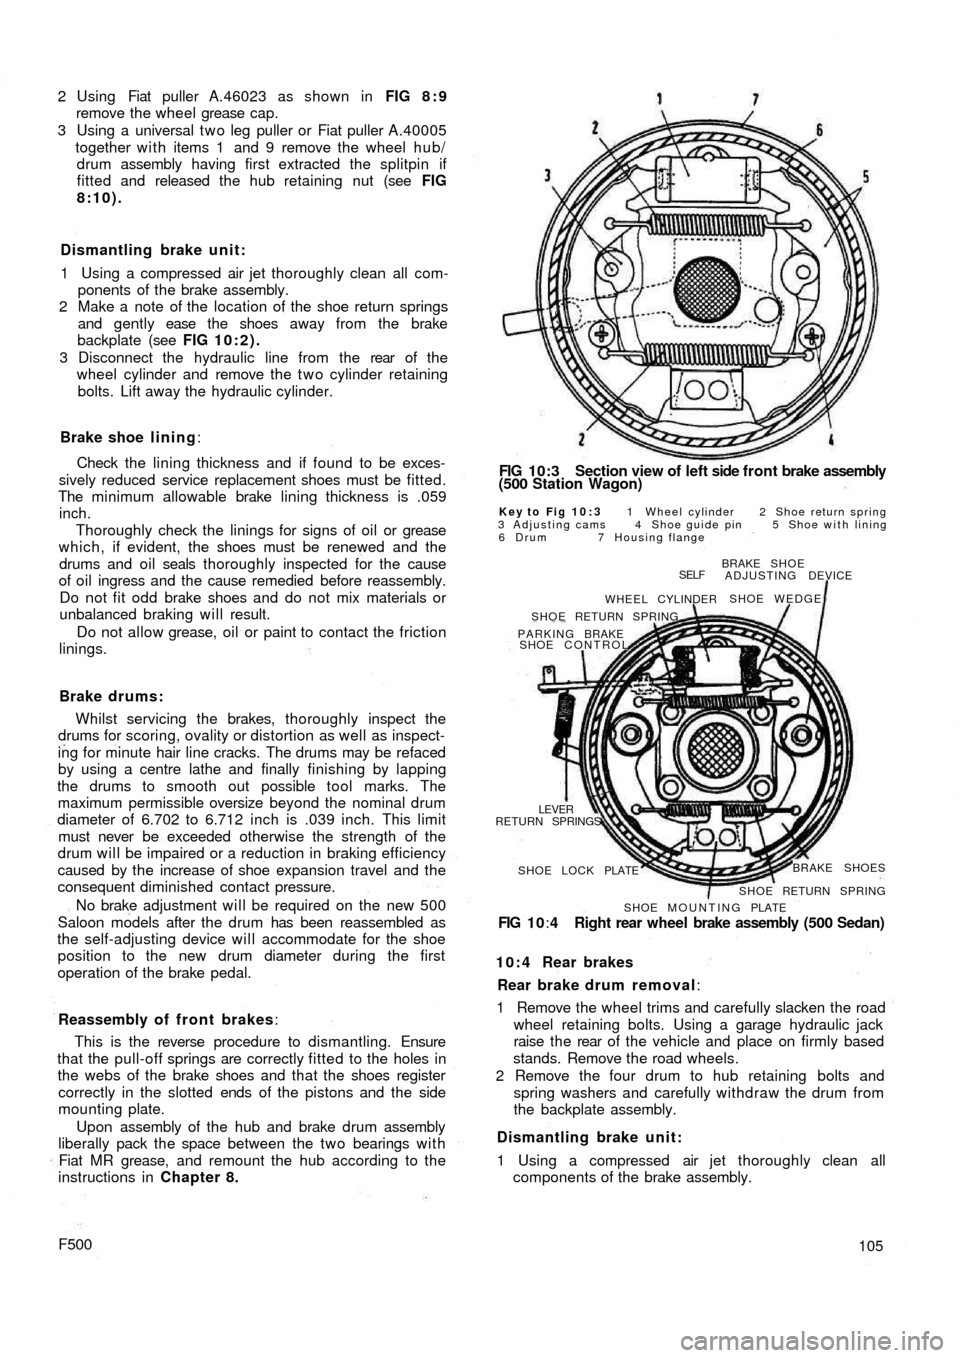 FIAT 500 1969 1.G Workshop Manual 2 Using  Fiat puller A.46023 as shown in FIG 8 : 9
remove the wheel grease cap.
3 Using a universal t w o leg puller or Fiat puller A.40005
together w i t h items 1  and 9 remove the wheel hub/
drum a